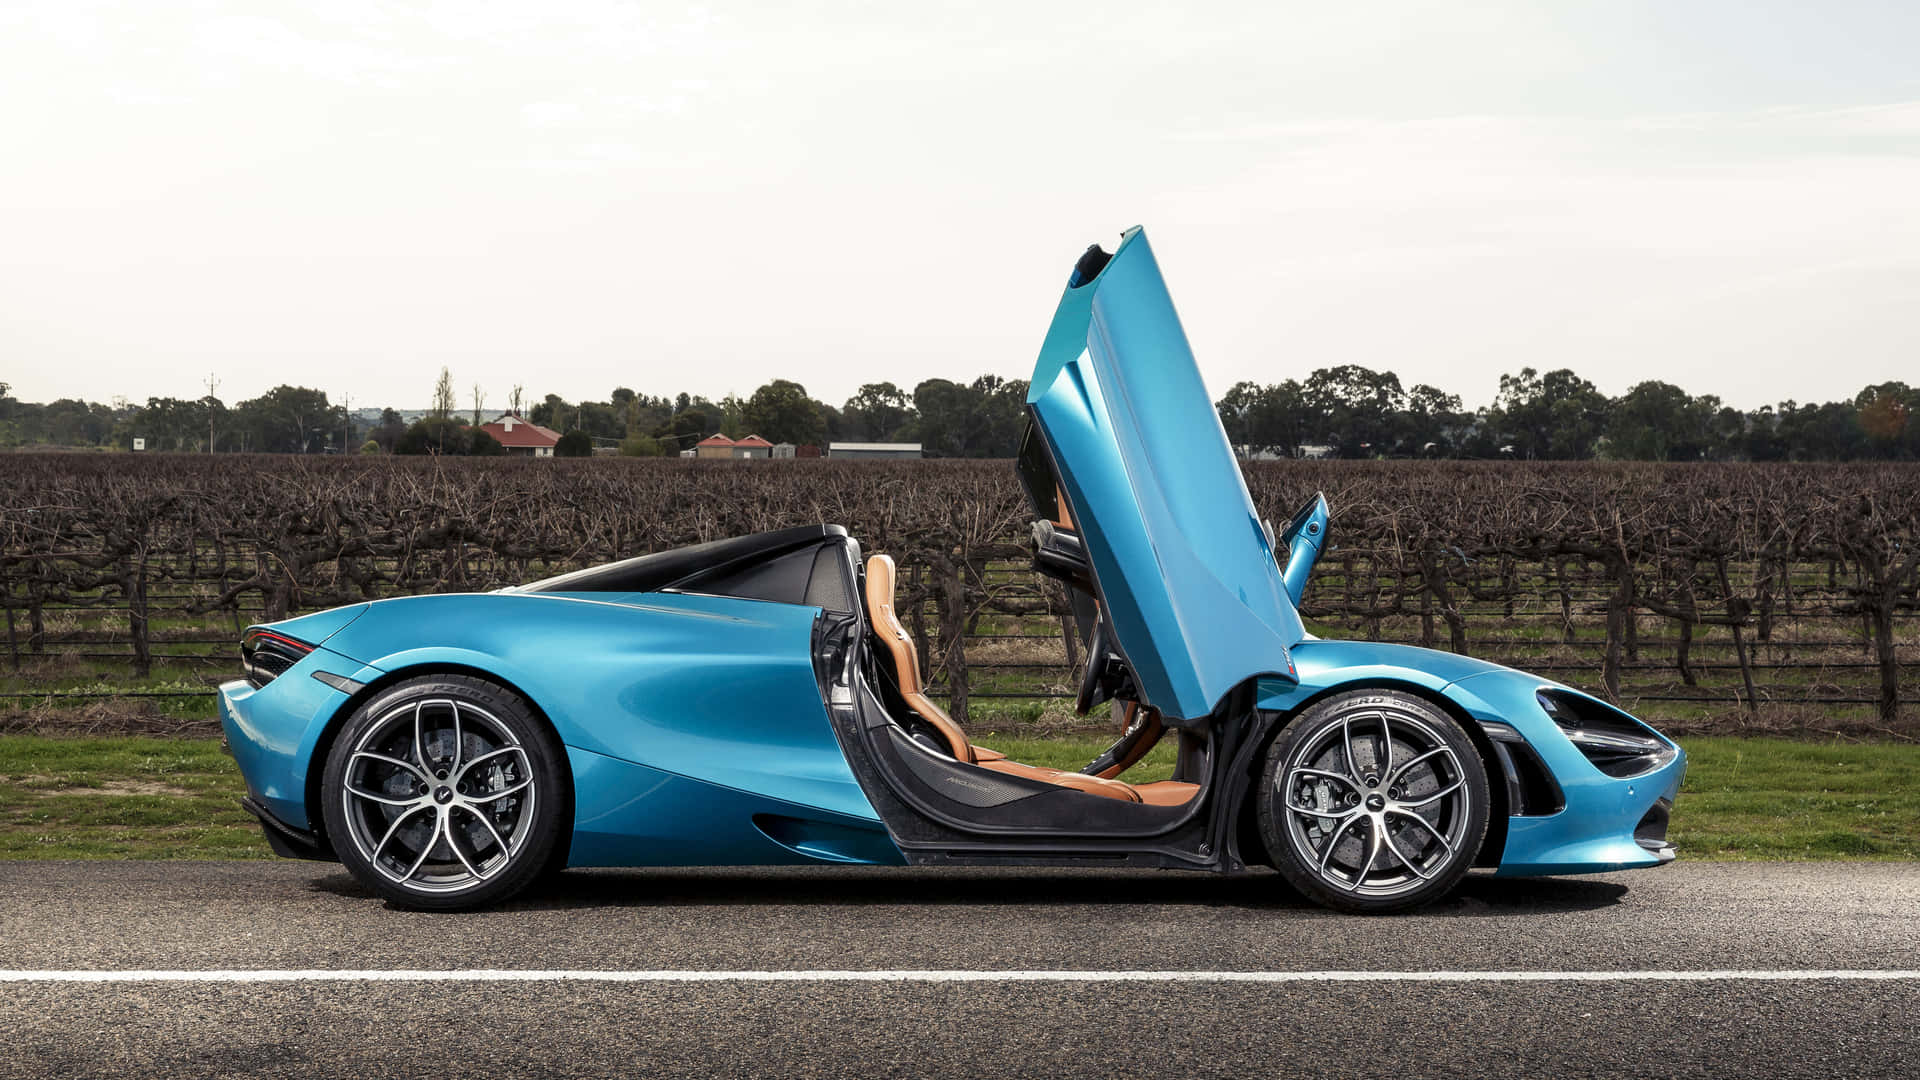 A Blue Sports Car With Its Doors Open